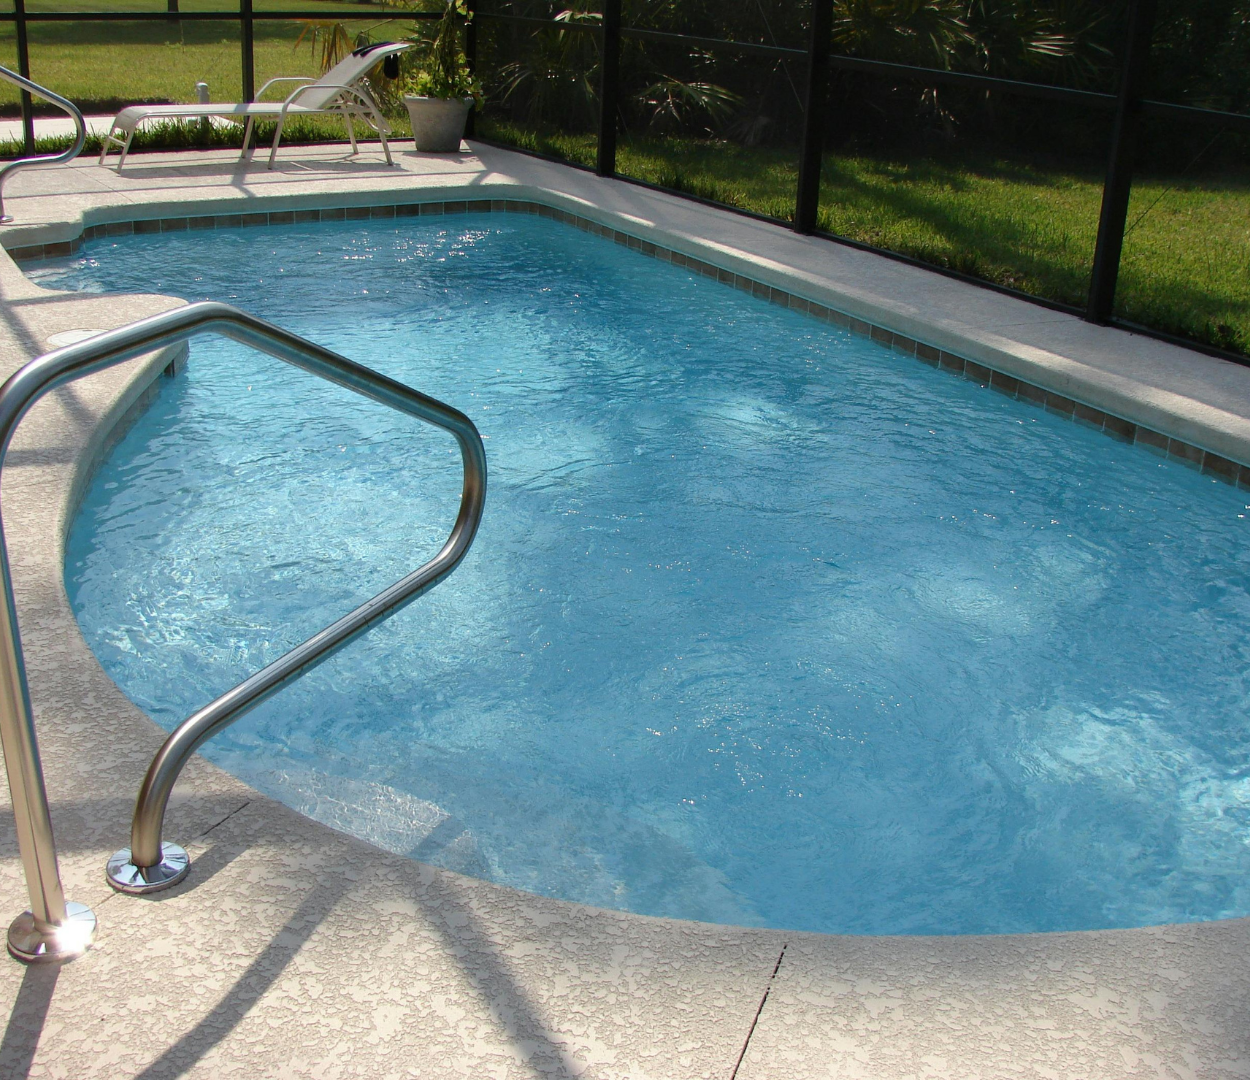 How to Choose the Right Pool Vacuum Debris Bag for Your Cleaning Needs